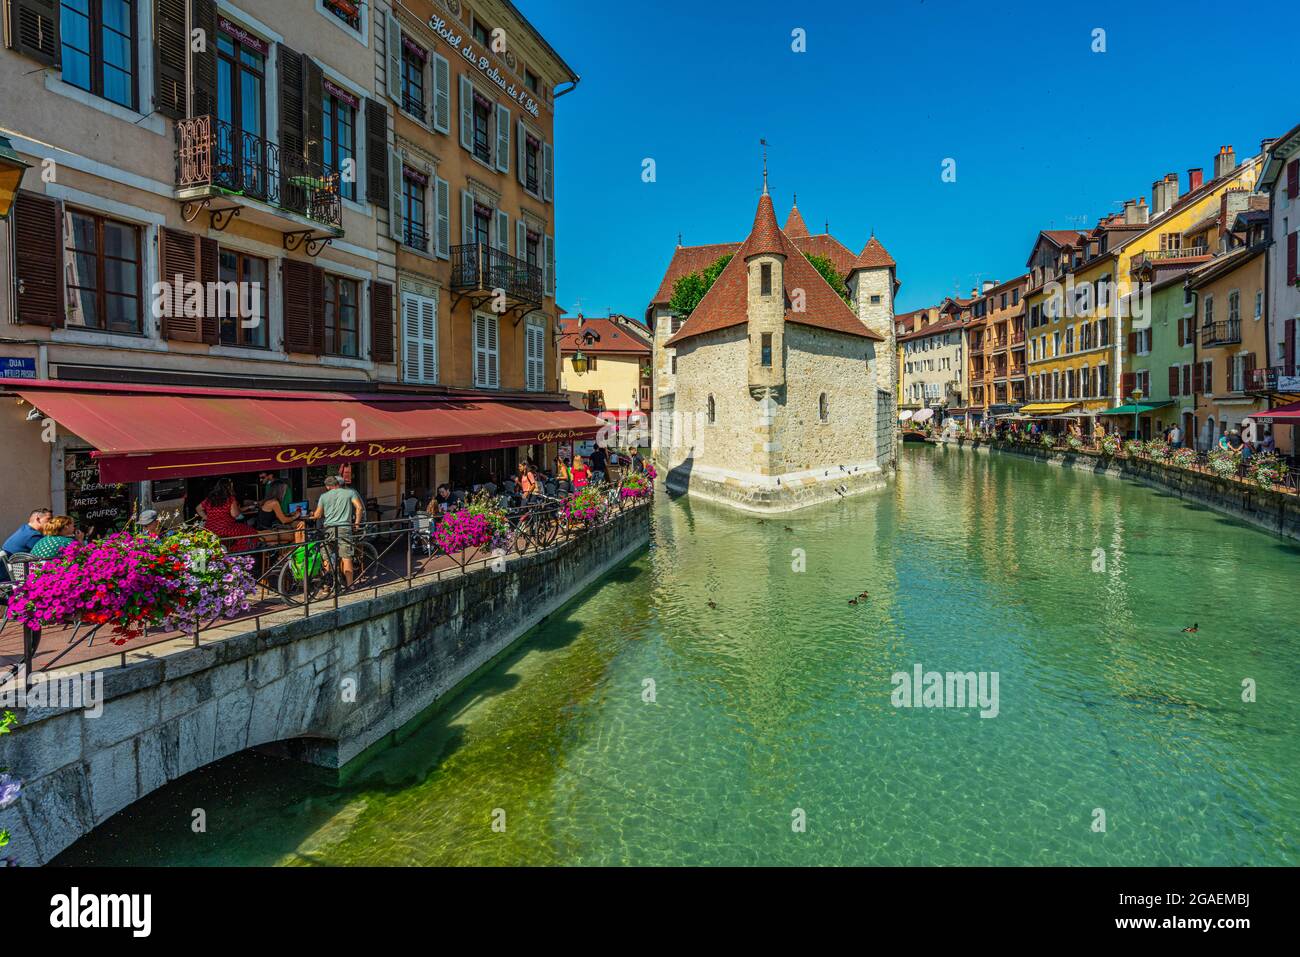 The old prisons of the city of Annecy have now become a tourist attraction. Along the canals, cafes and restaurants abound. Annecy, Haute-Savoie, Stock Photo